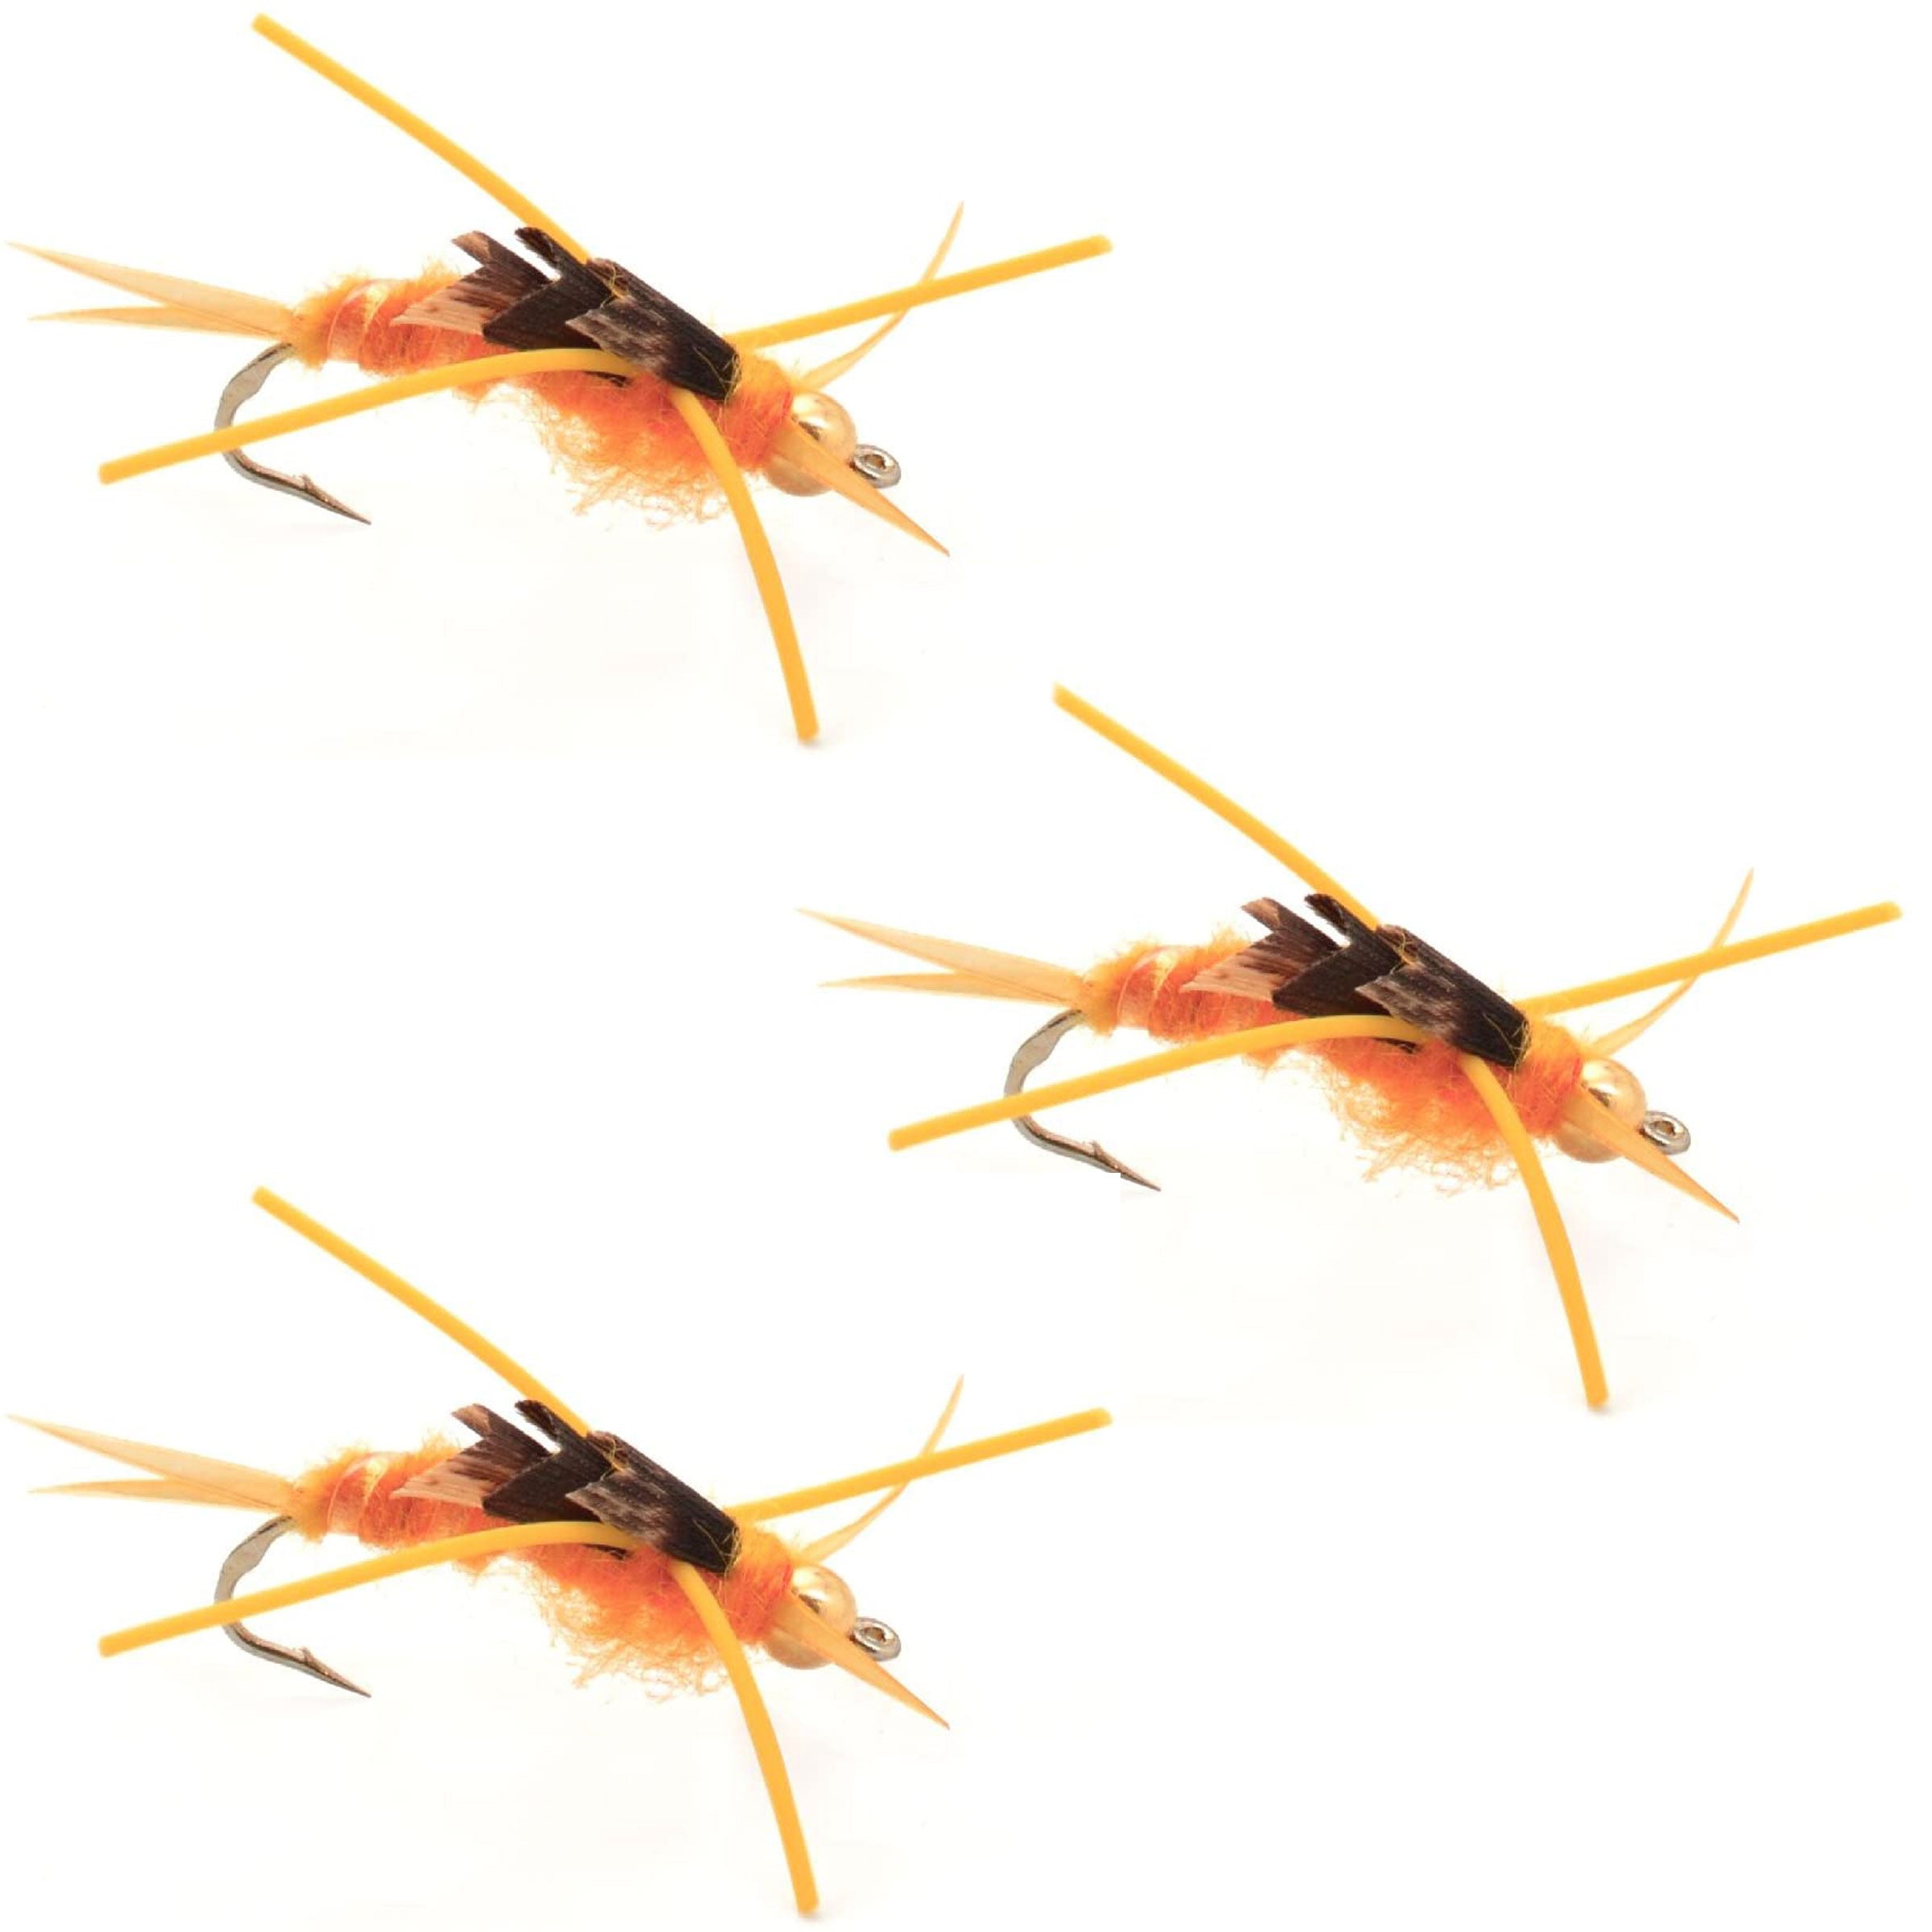 3 Pack Gold Bead Kaufmann's Golden Stone Fly with Rubber Legs - Stonefly Wet Fly - Hook Size 6